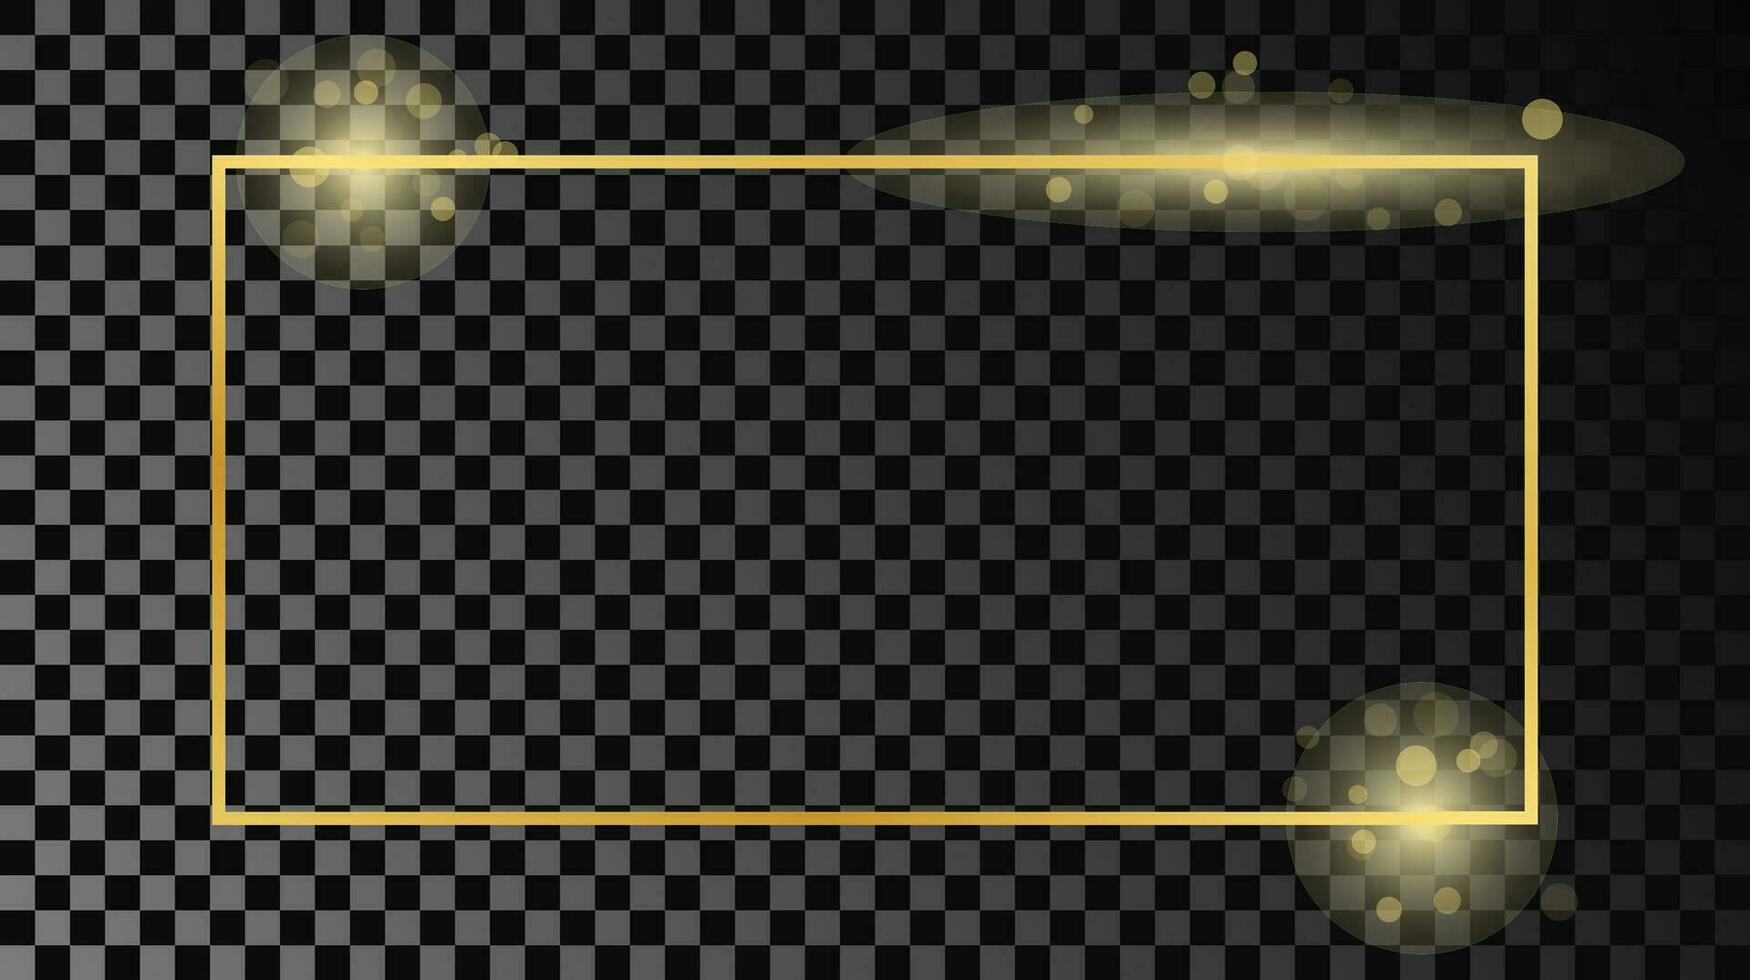 Gold glowing rectangular shape frame isolated on dark background. Shiny frame with glowing effects. Vector illustration.